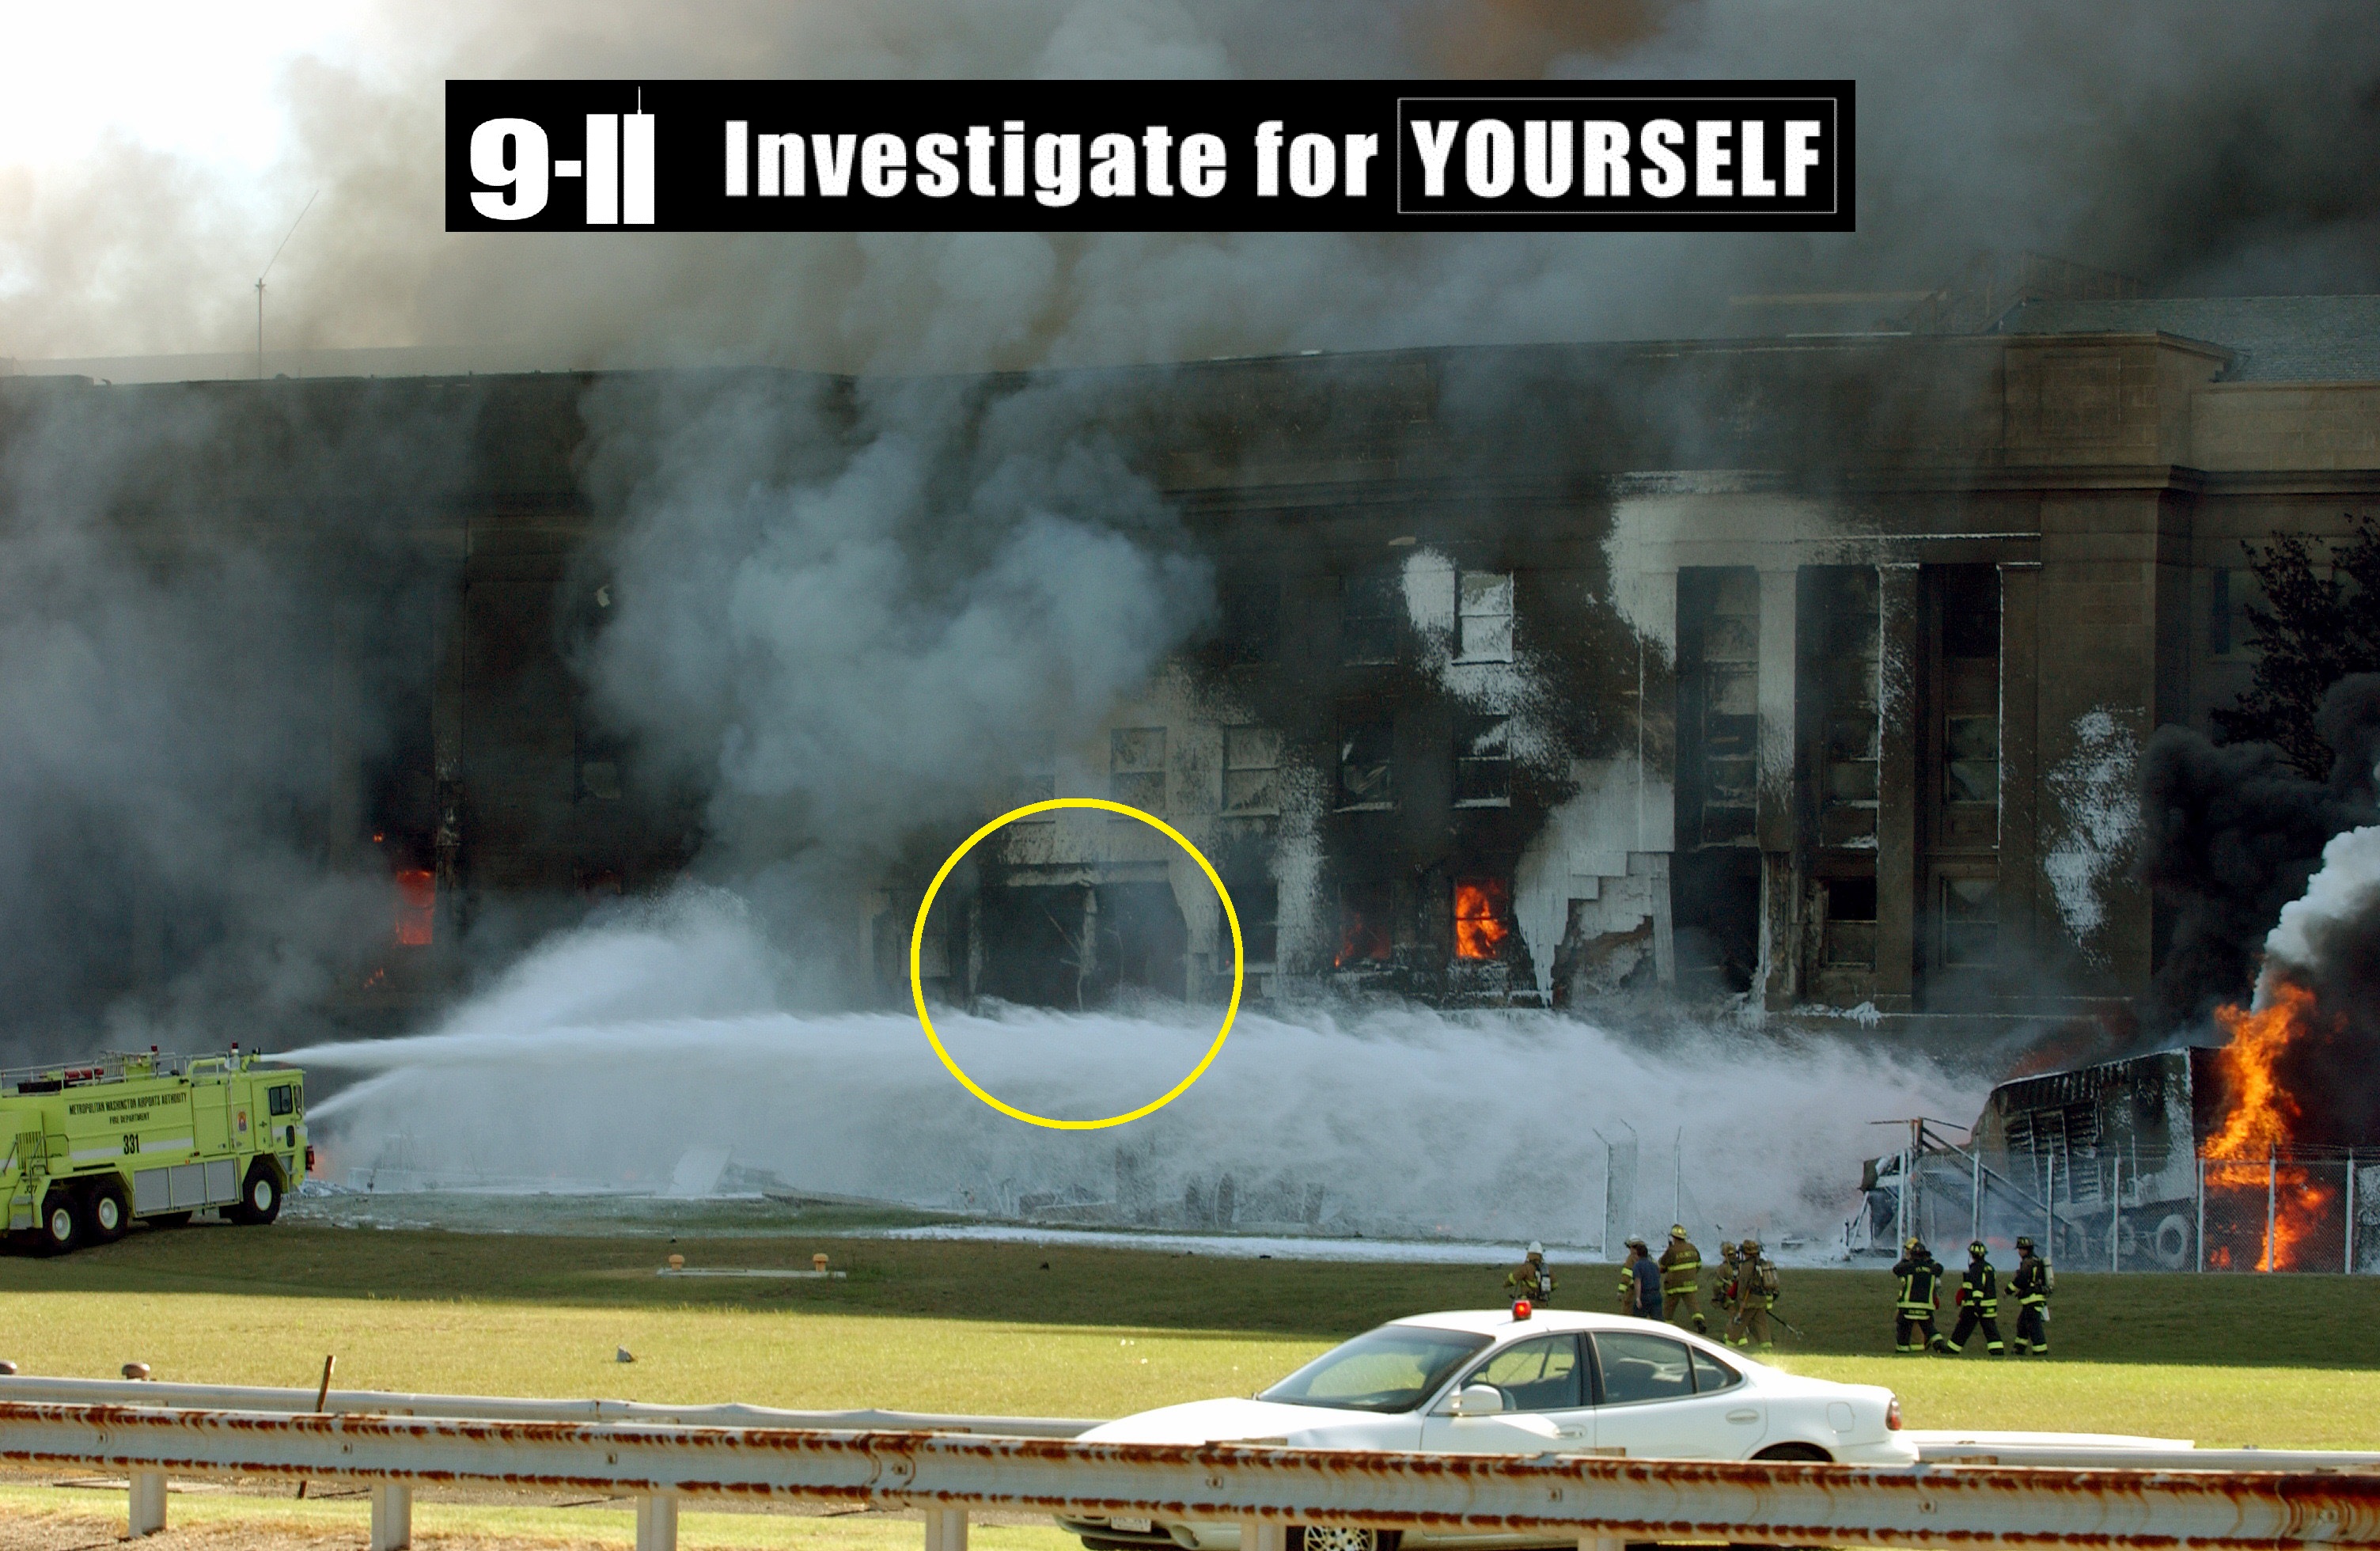 The Pentagon in flames moments after a hijacked jetliner crashed into building at approximately 0930 on September 11, 2001.